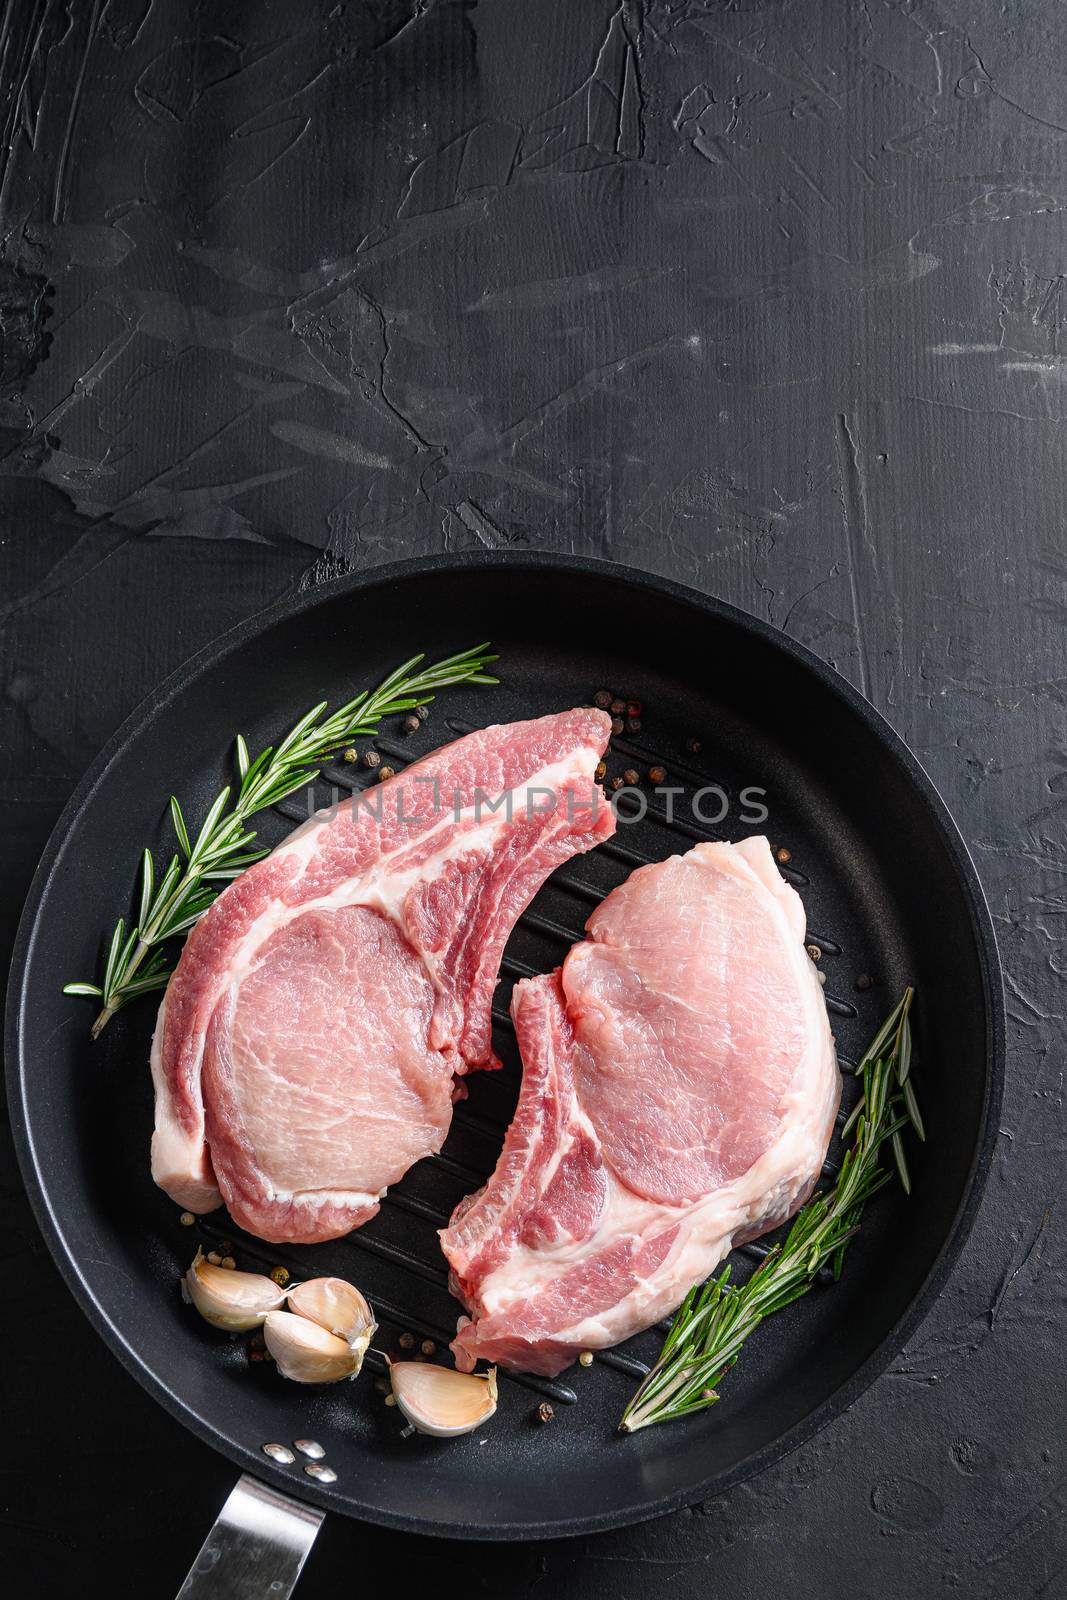 pork rib chops in frying pan grill skillet with herbs, spices top view black stone bakground space for text vertical by Ilianesolenyi